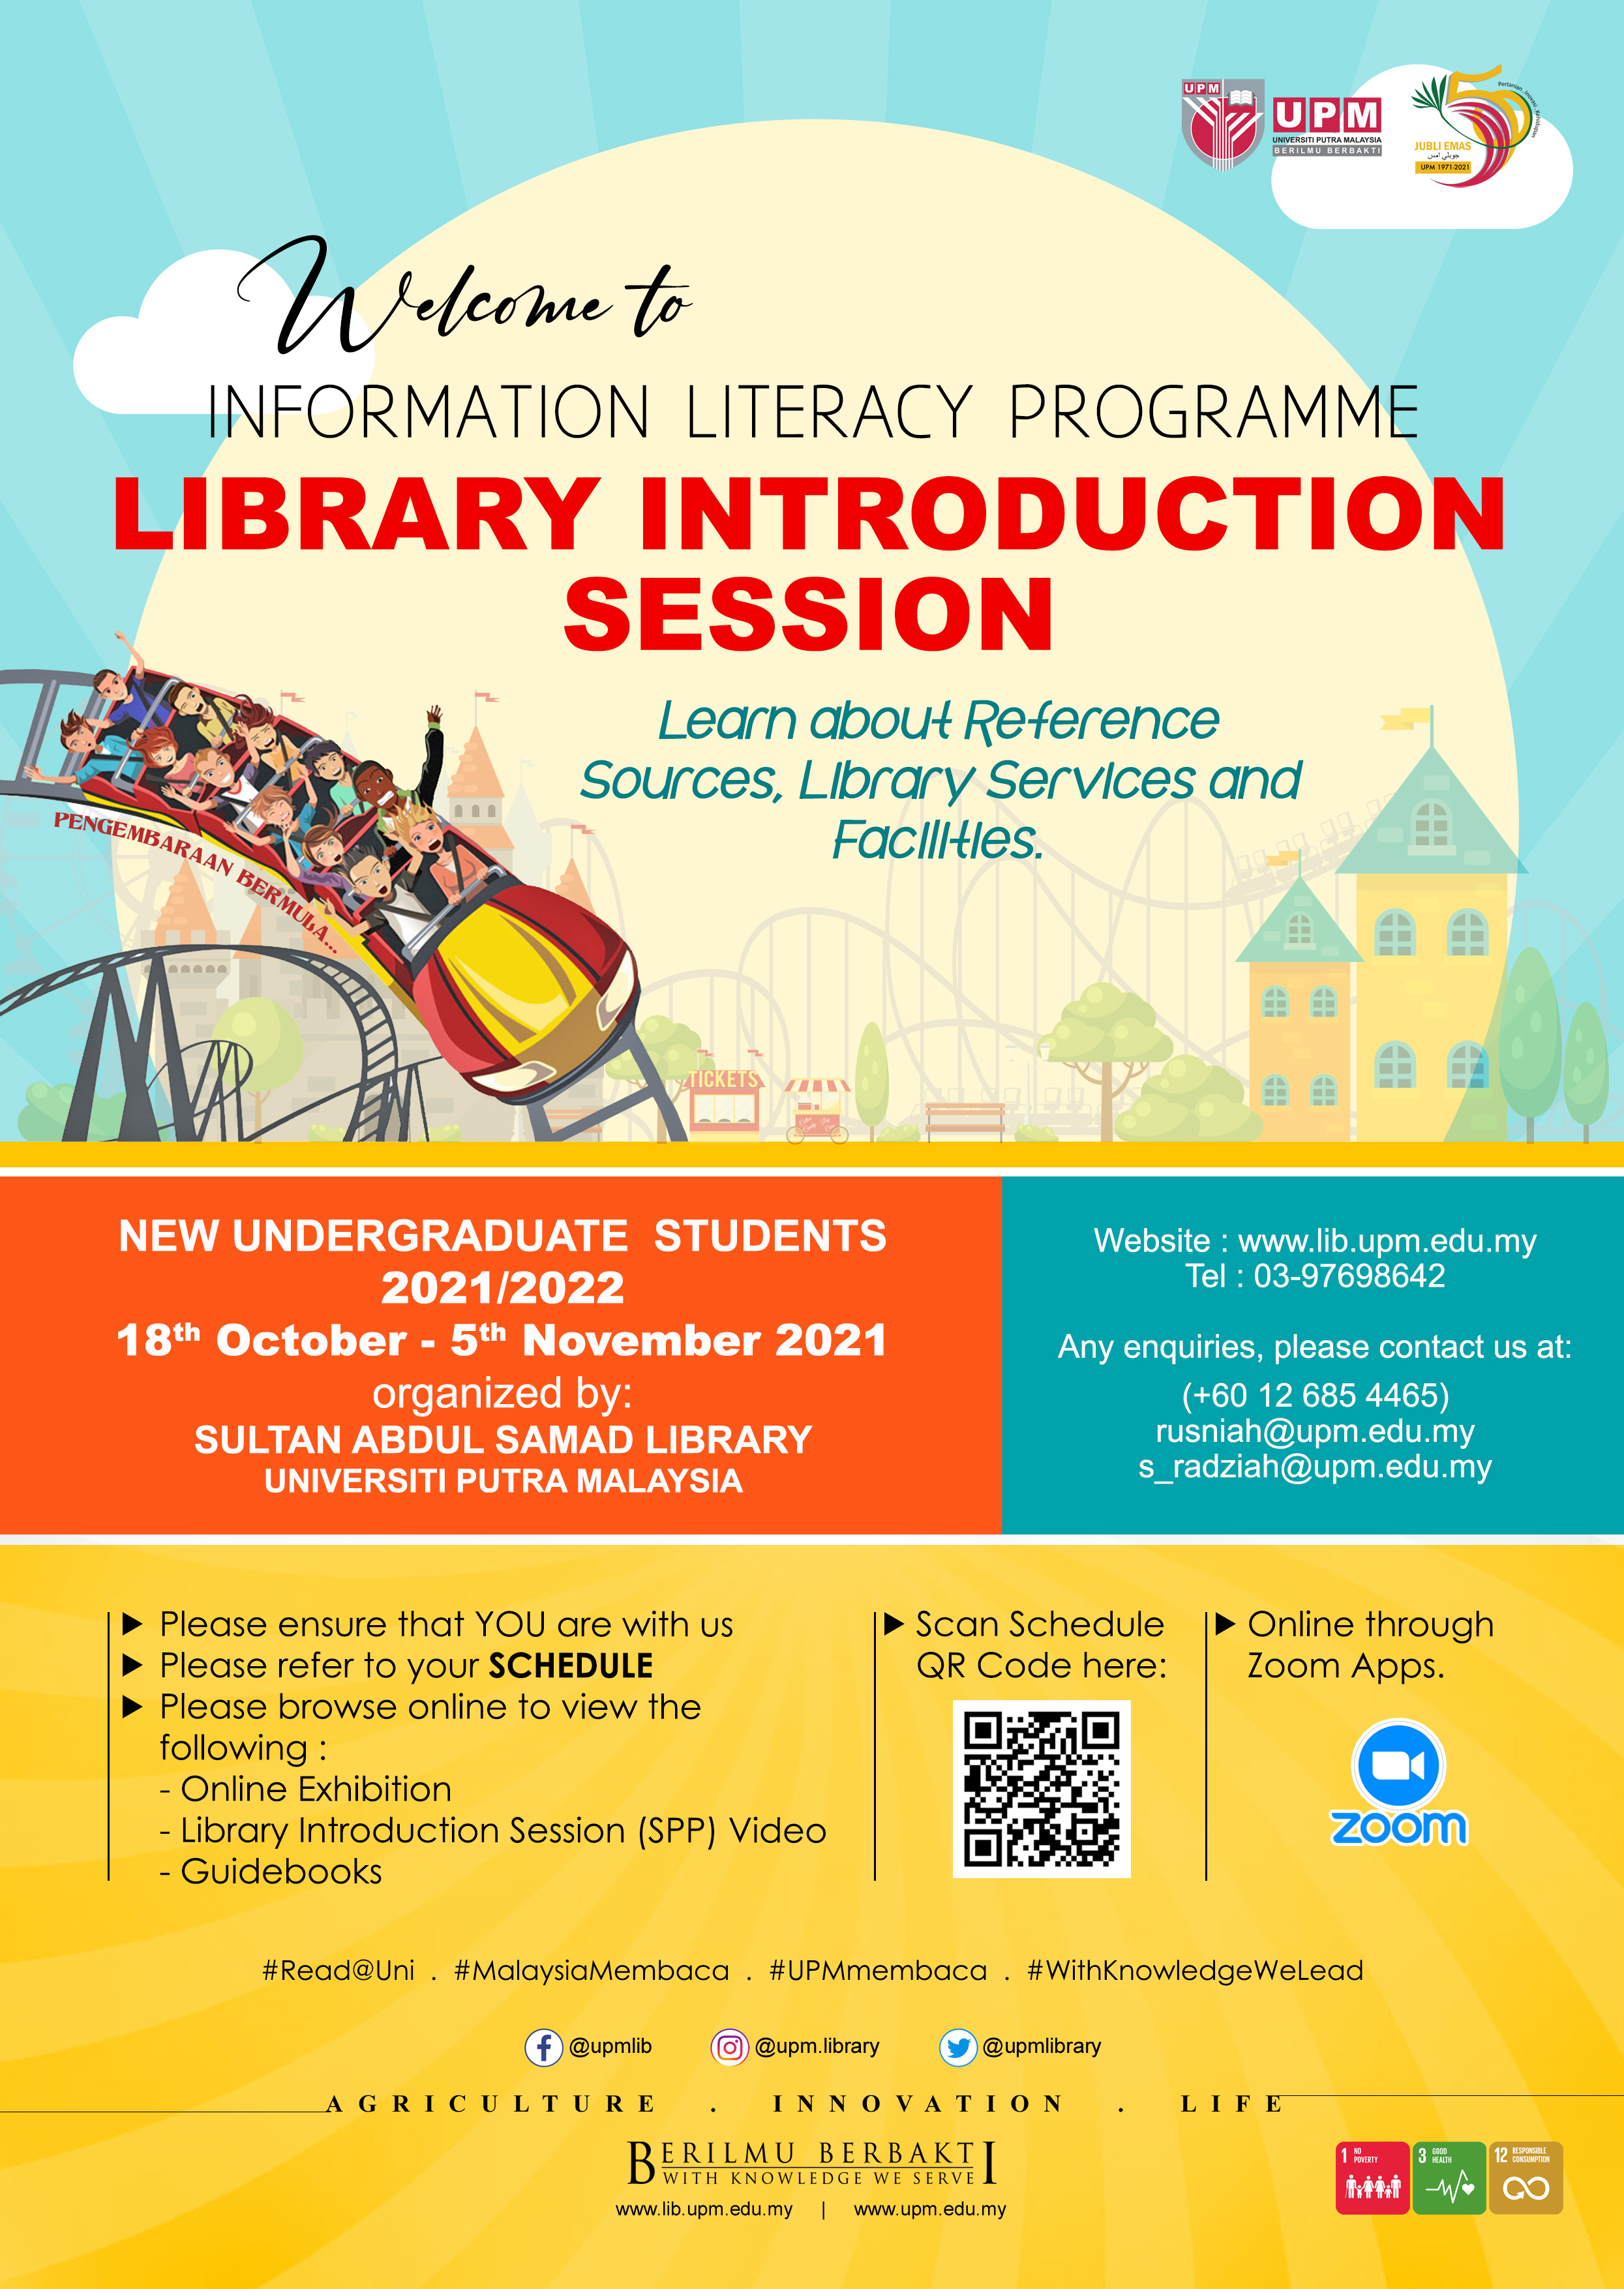 Online Library Information Literacy Programme: Library Introduction Session For New Undergraduate Students 2021/2022 Session